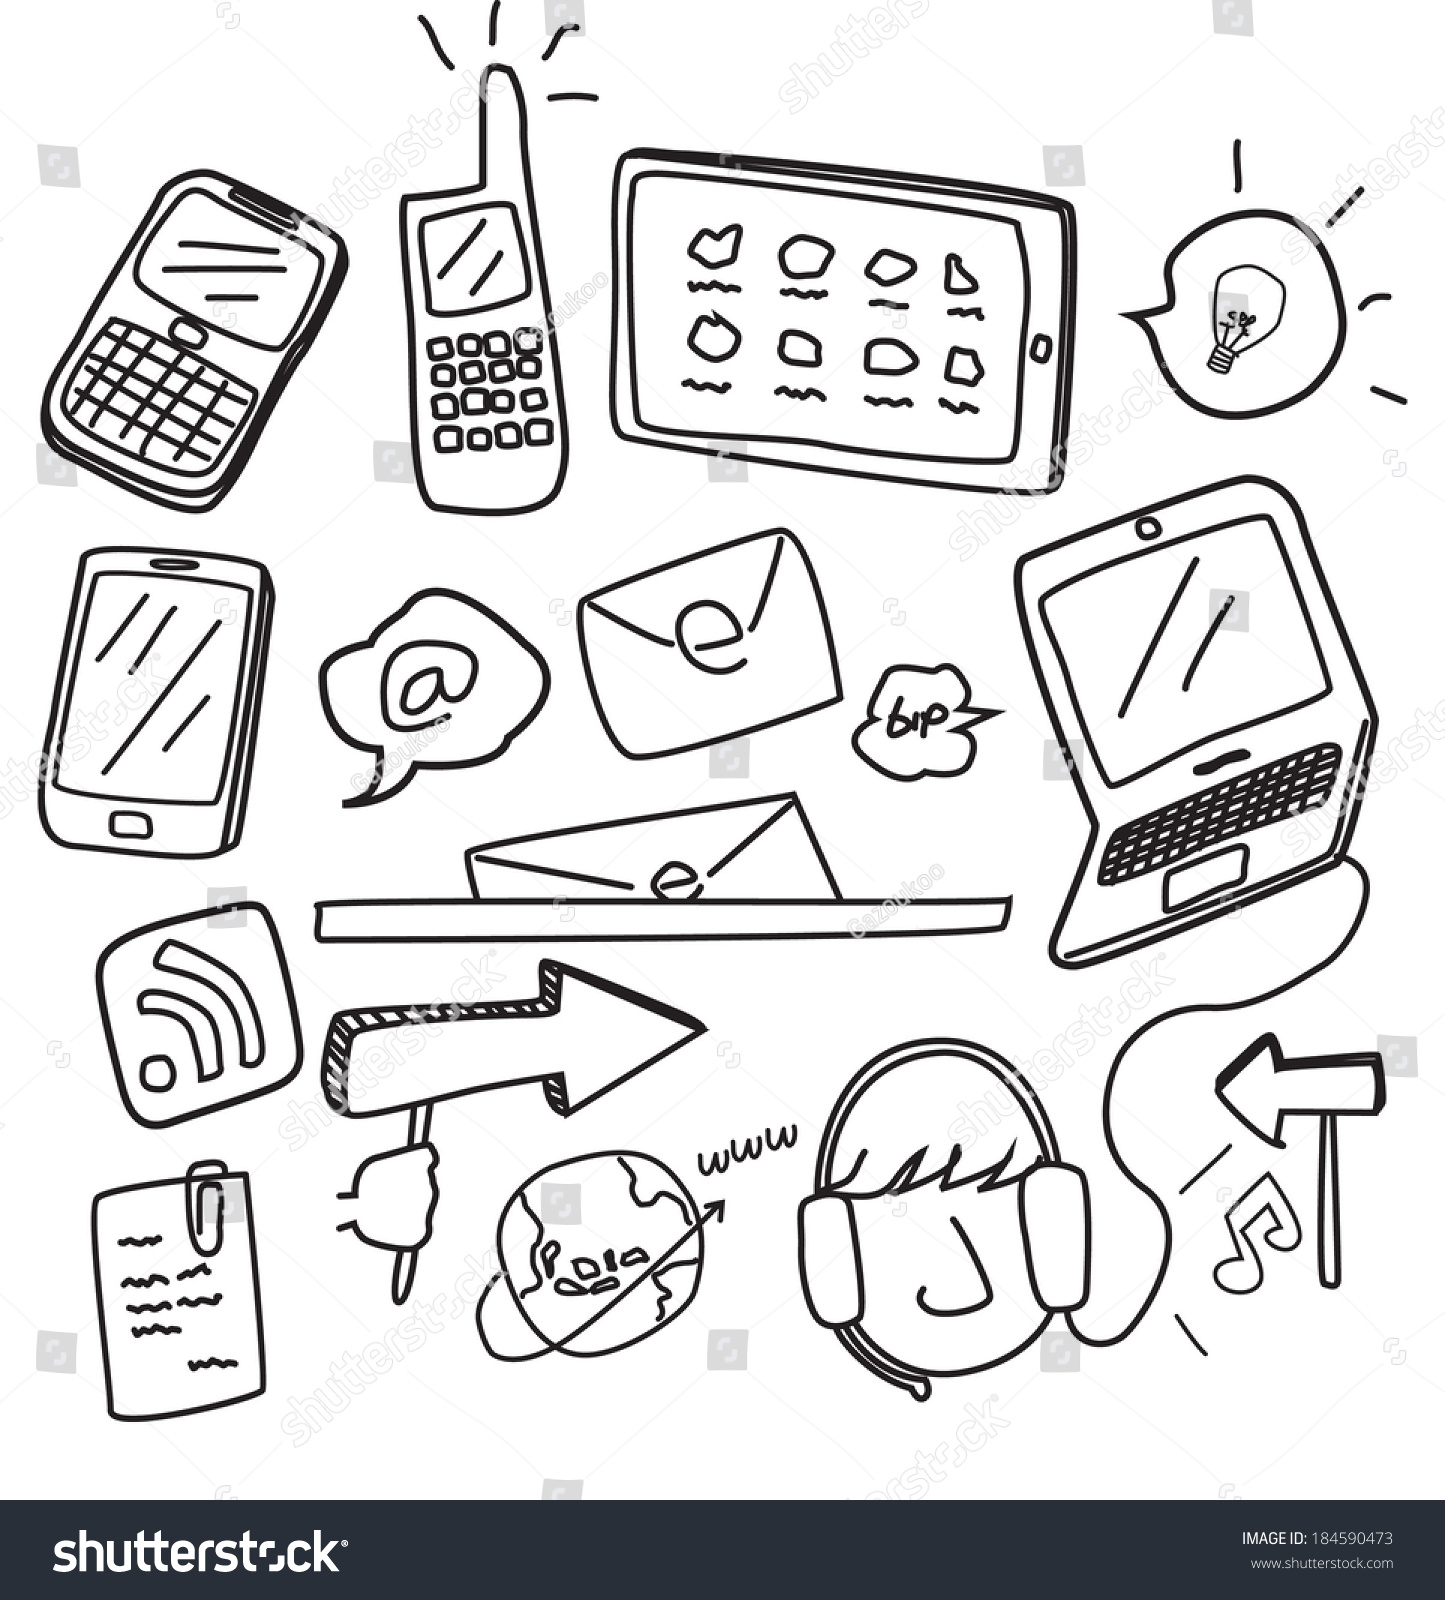 Royalty Free Information Technology Doodle 184590473 Stock Photo